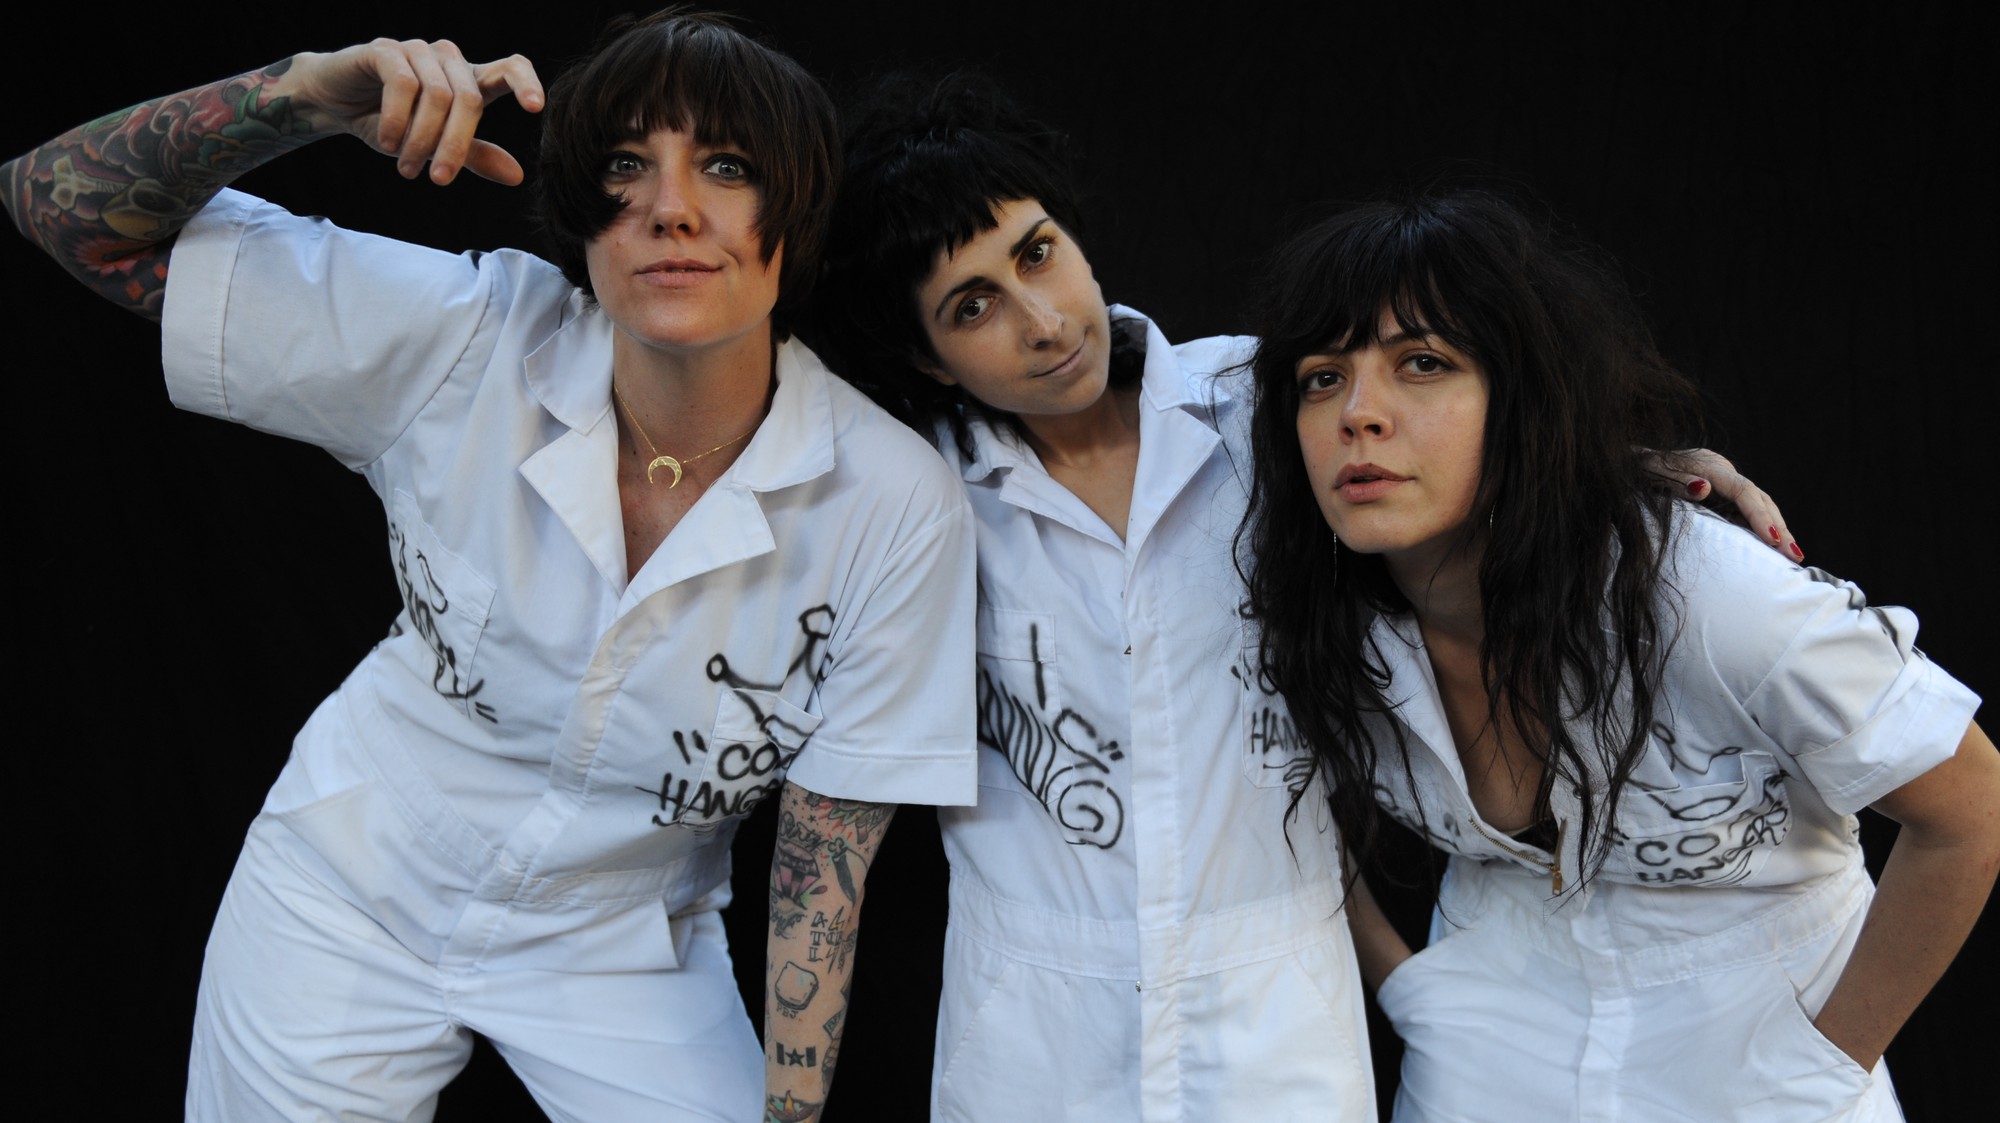 "Trailer Park Boneyard" by The Coathangers photo by Jeff Forney